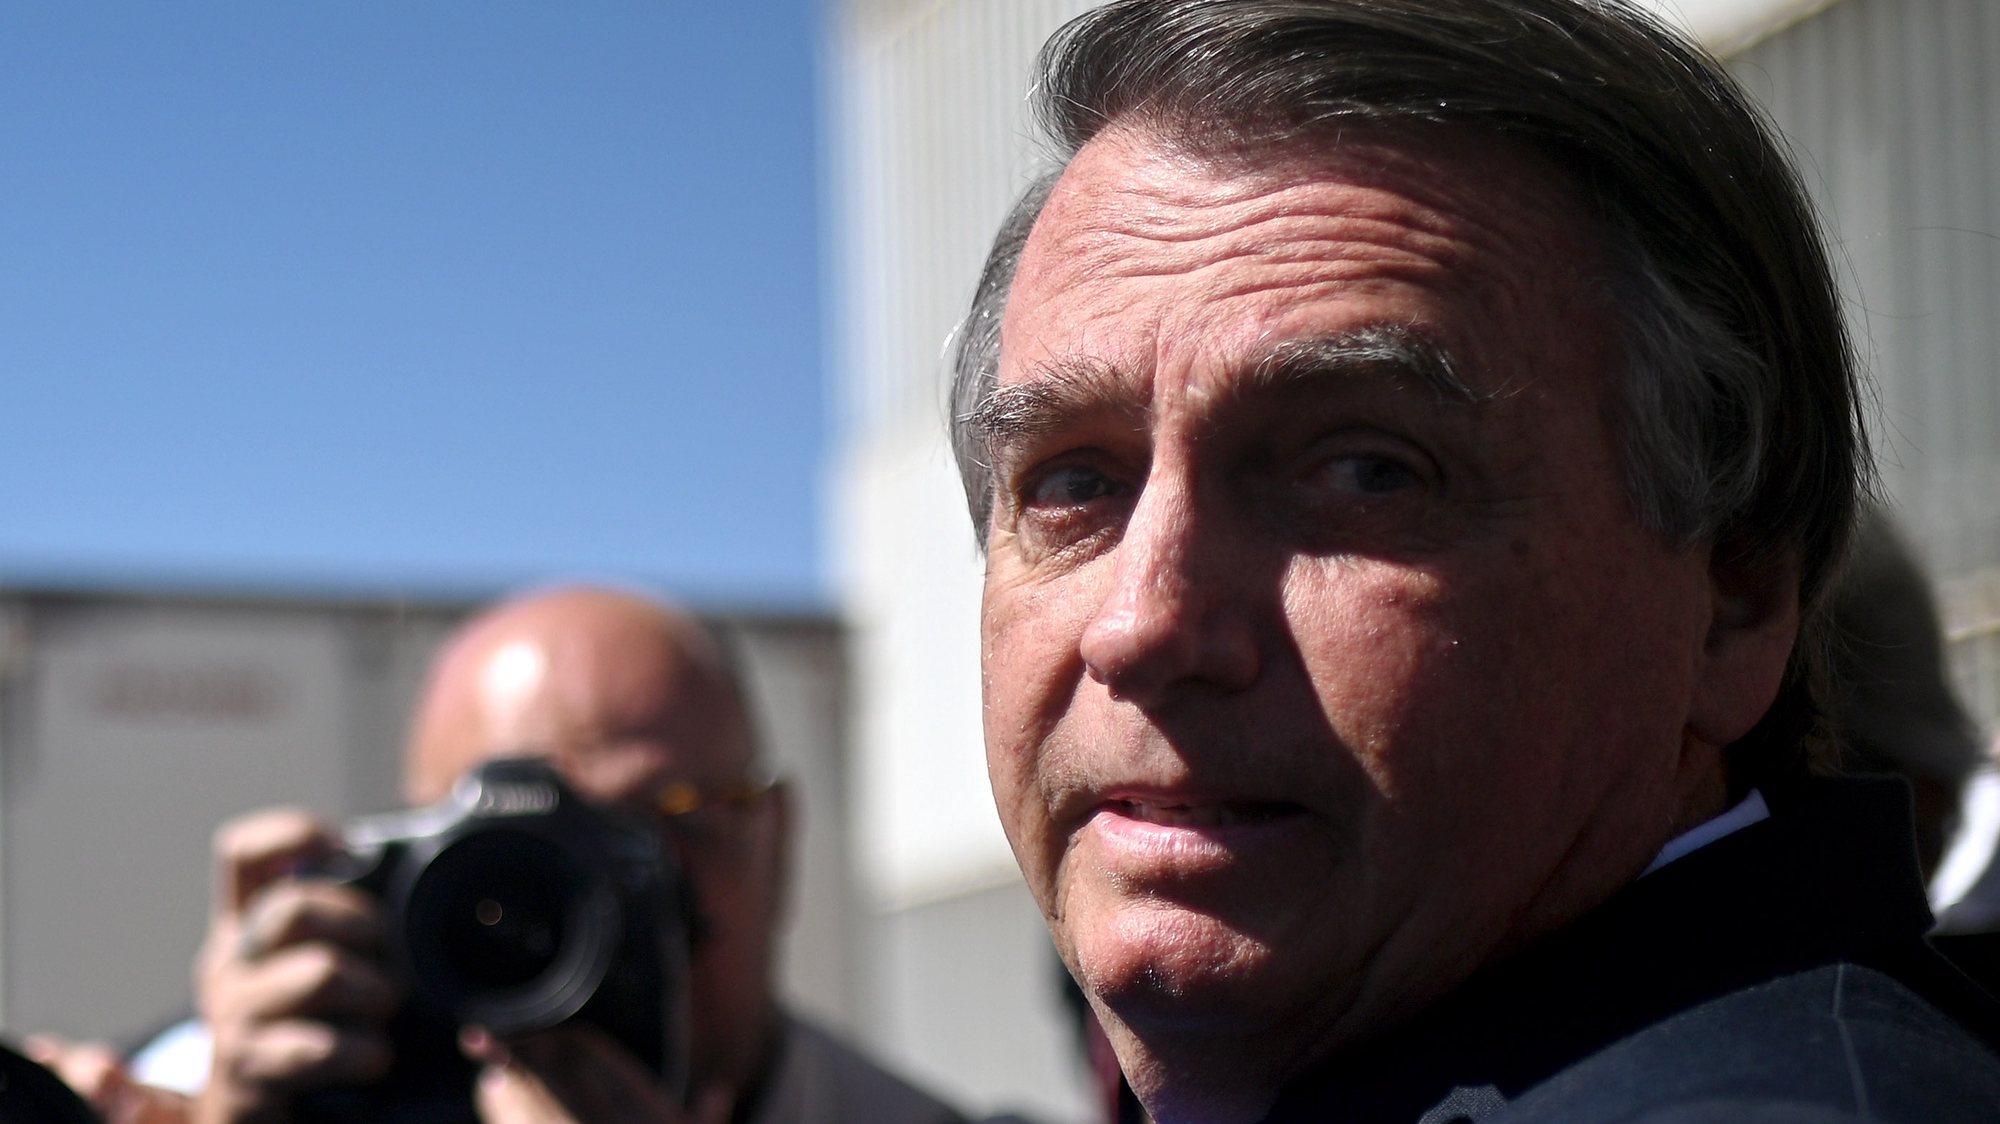 epa10704195 Former president of Brazil, Jair Bolsonaro, leaves the Federal Senate after visiting his son Senator Flavio Bolsonaro at the National Congress in Brasilia, Brazil 21 June 2023. The Superior Electoral Court (TSE) will begin a trial on 22 June for alleged abuses of power by former Brazilian President Jair Bolsonaro, who may lose all his political rights if found guilty.  EPA/Andre Borges